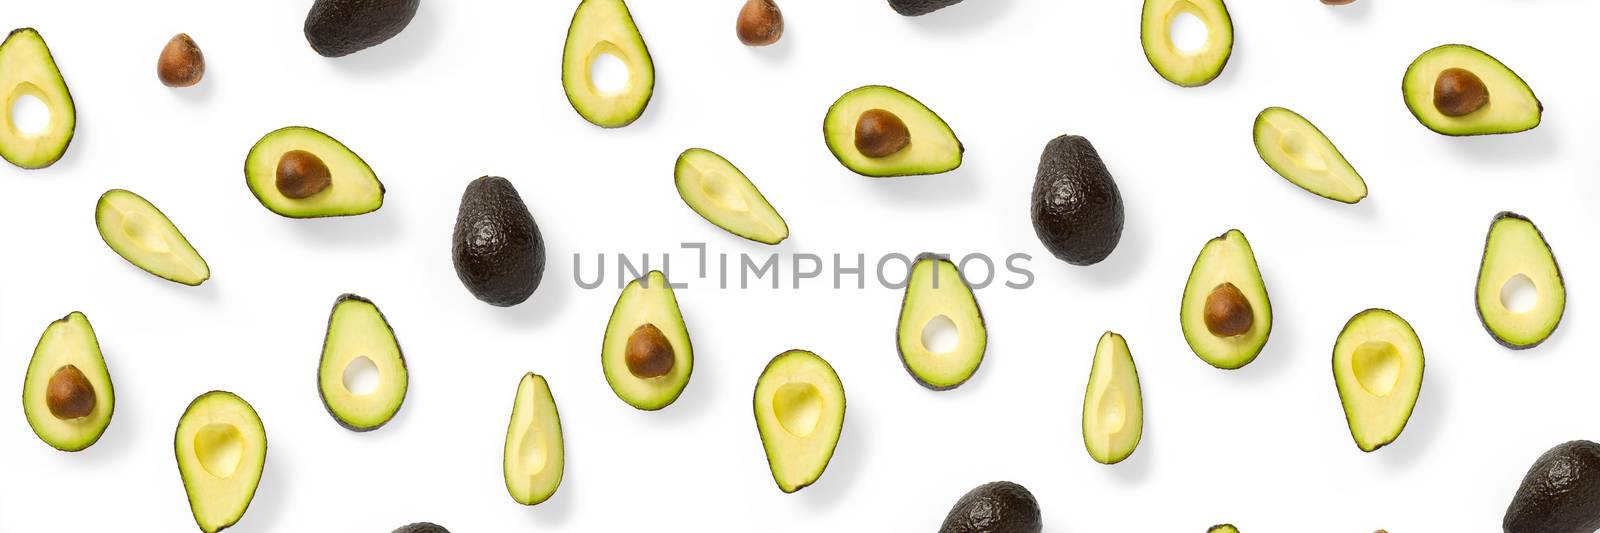 Avocado banner. Background made from isolated Avocado pieces on white background. Flat lay of fresh ripe avocados and avacado pieces